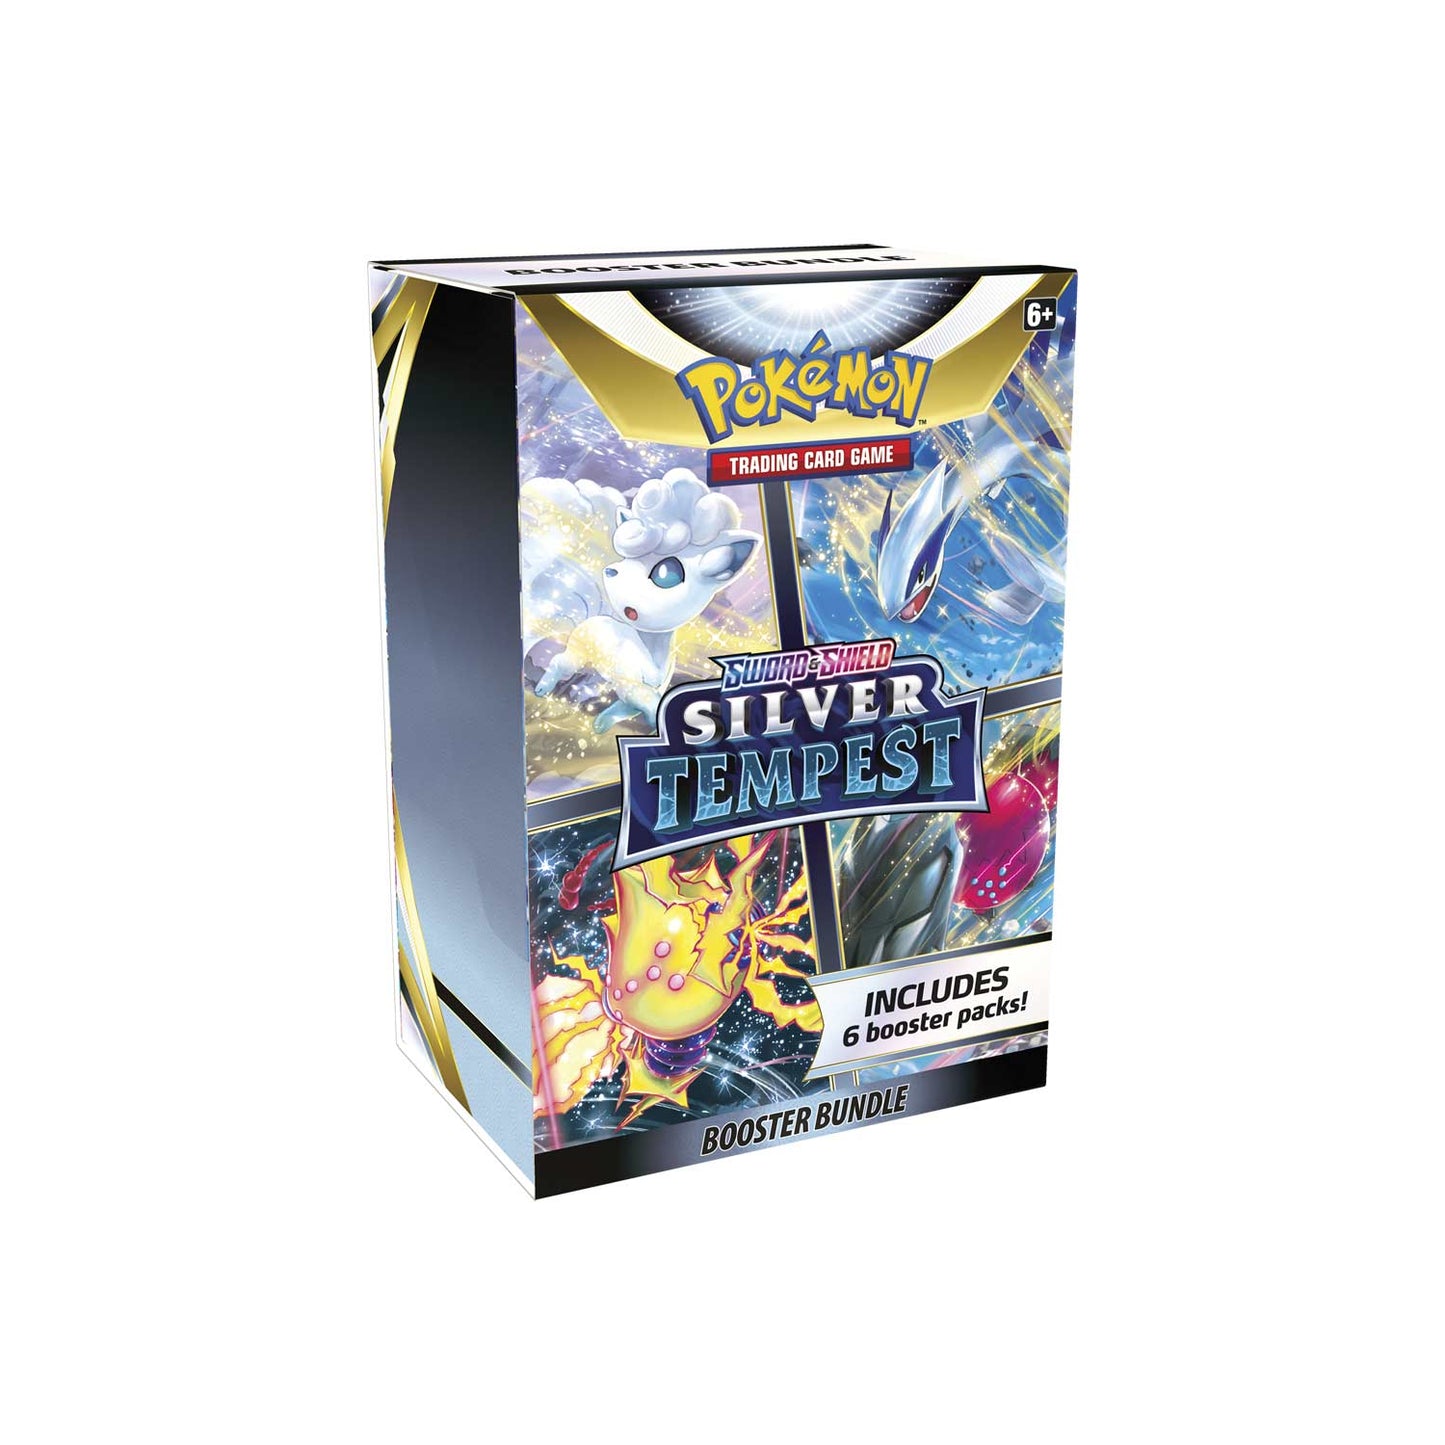 Pokemon TCG: Sword & Shield - Silver Tempest Booster Bundle (6 packs) - The Fourth Place